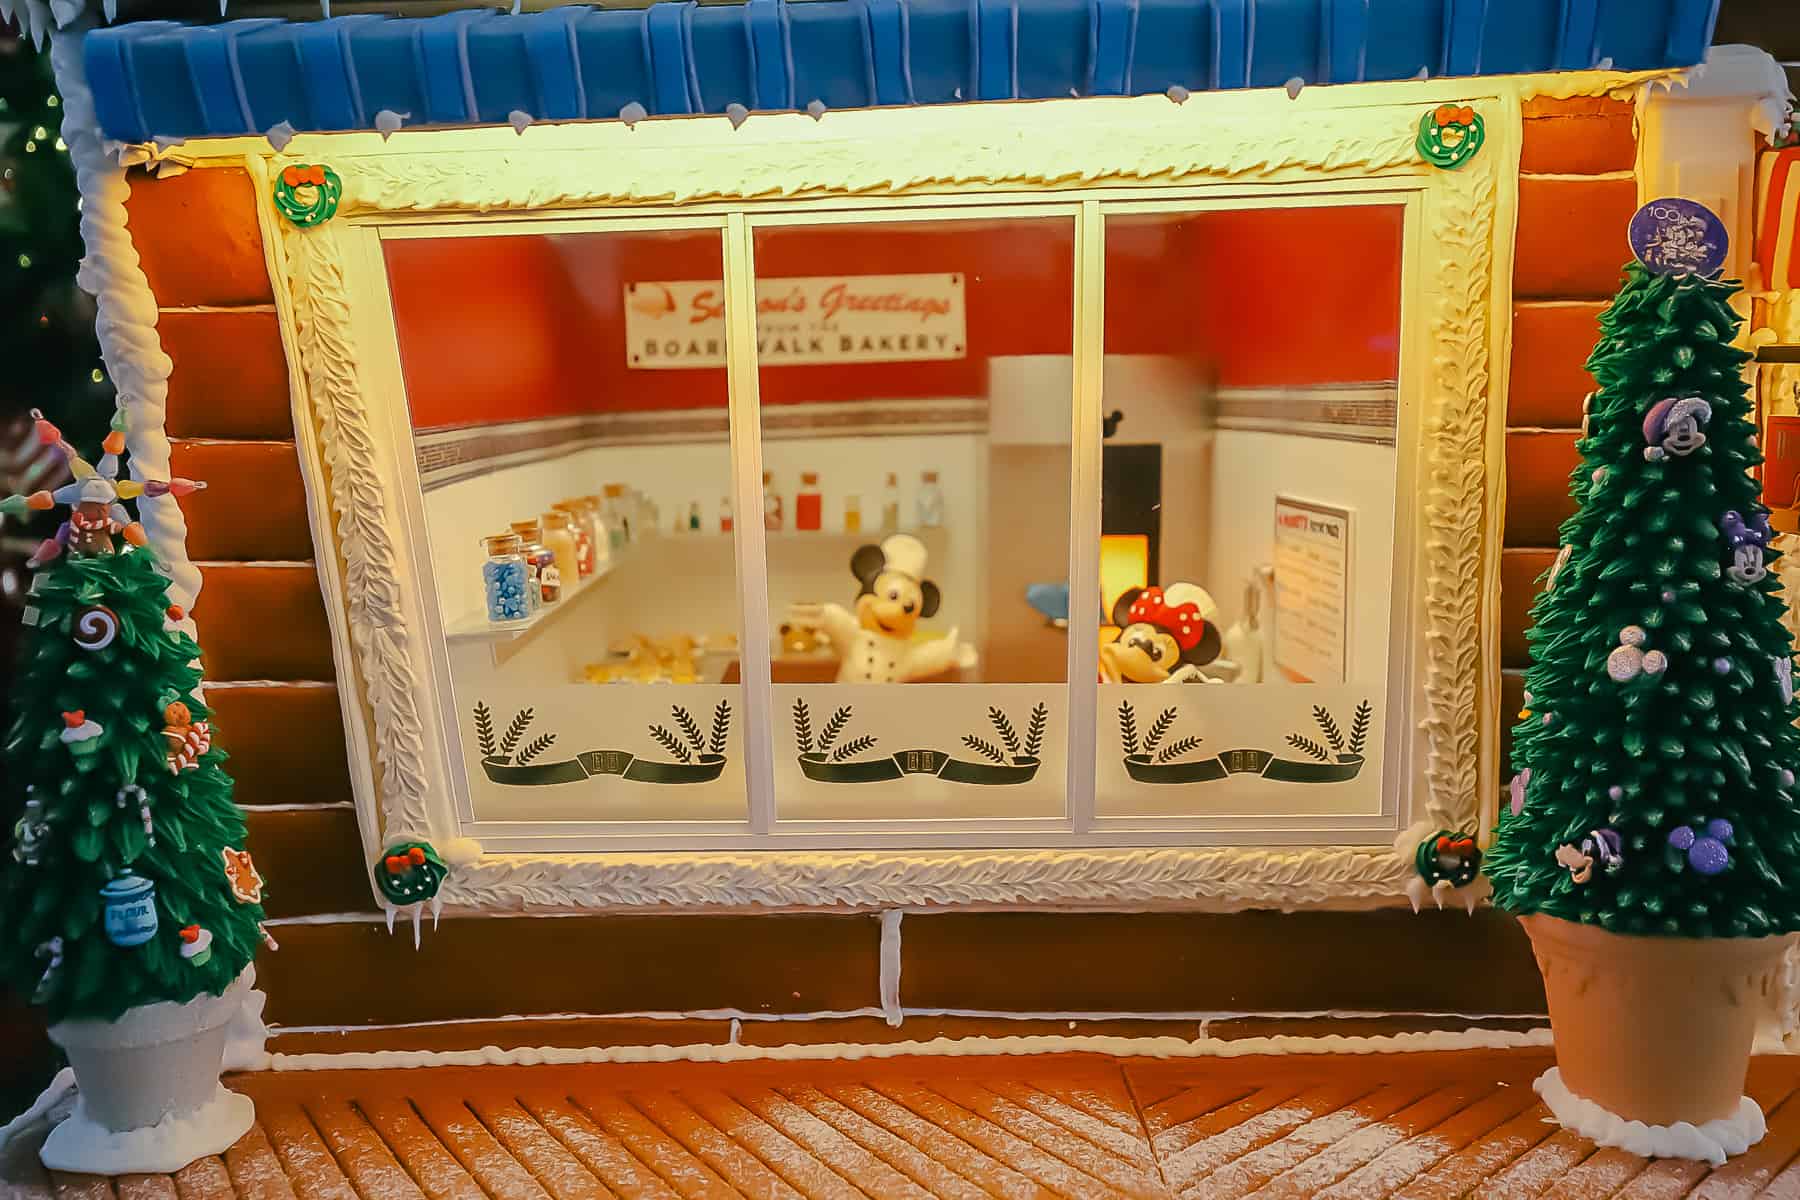 Inside the bakery window you can see Mickey and Minnie Mouse preparing items. 